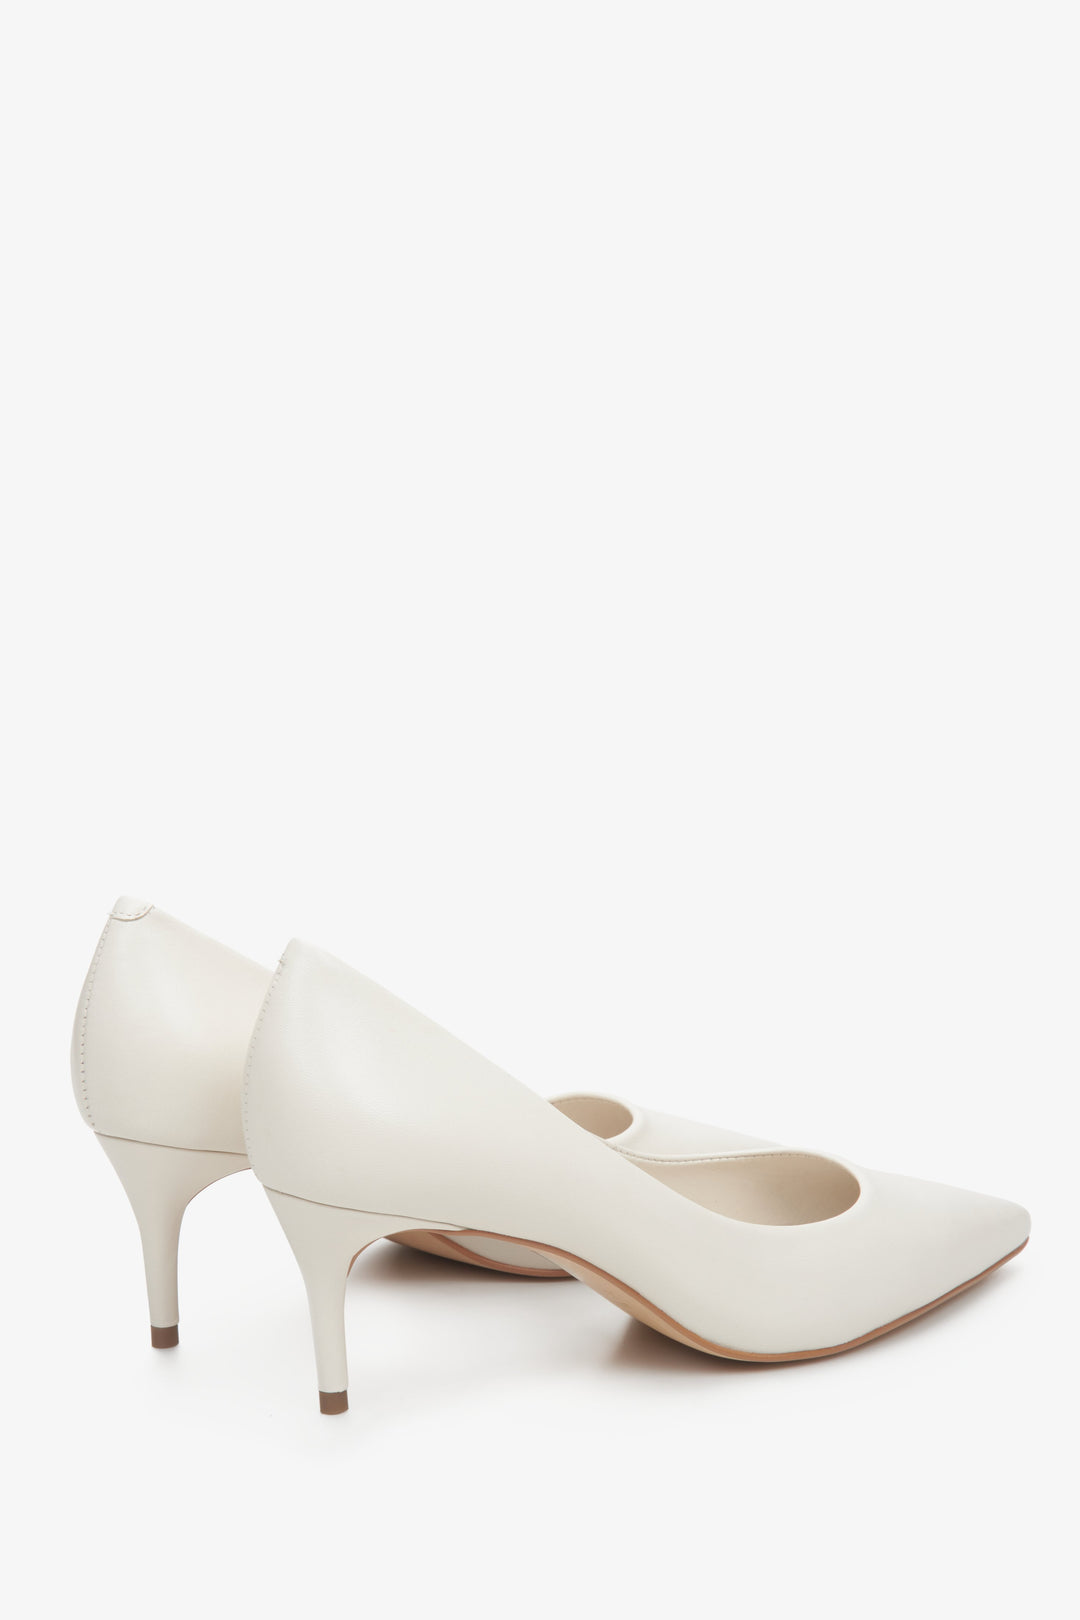 Women's leather shoes with a low heel in beige colour - close-up of the heel line.